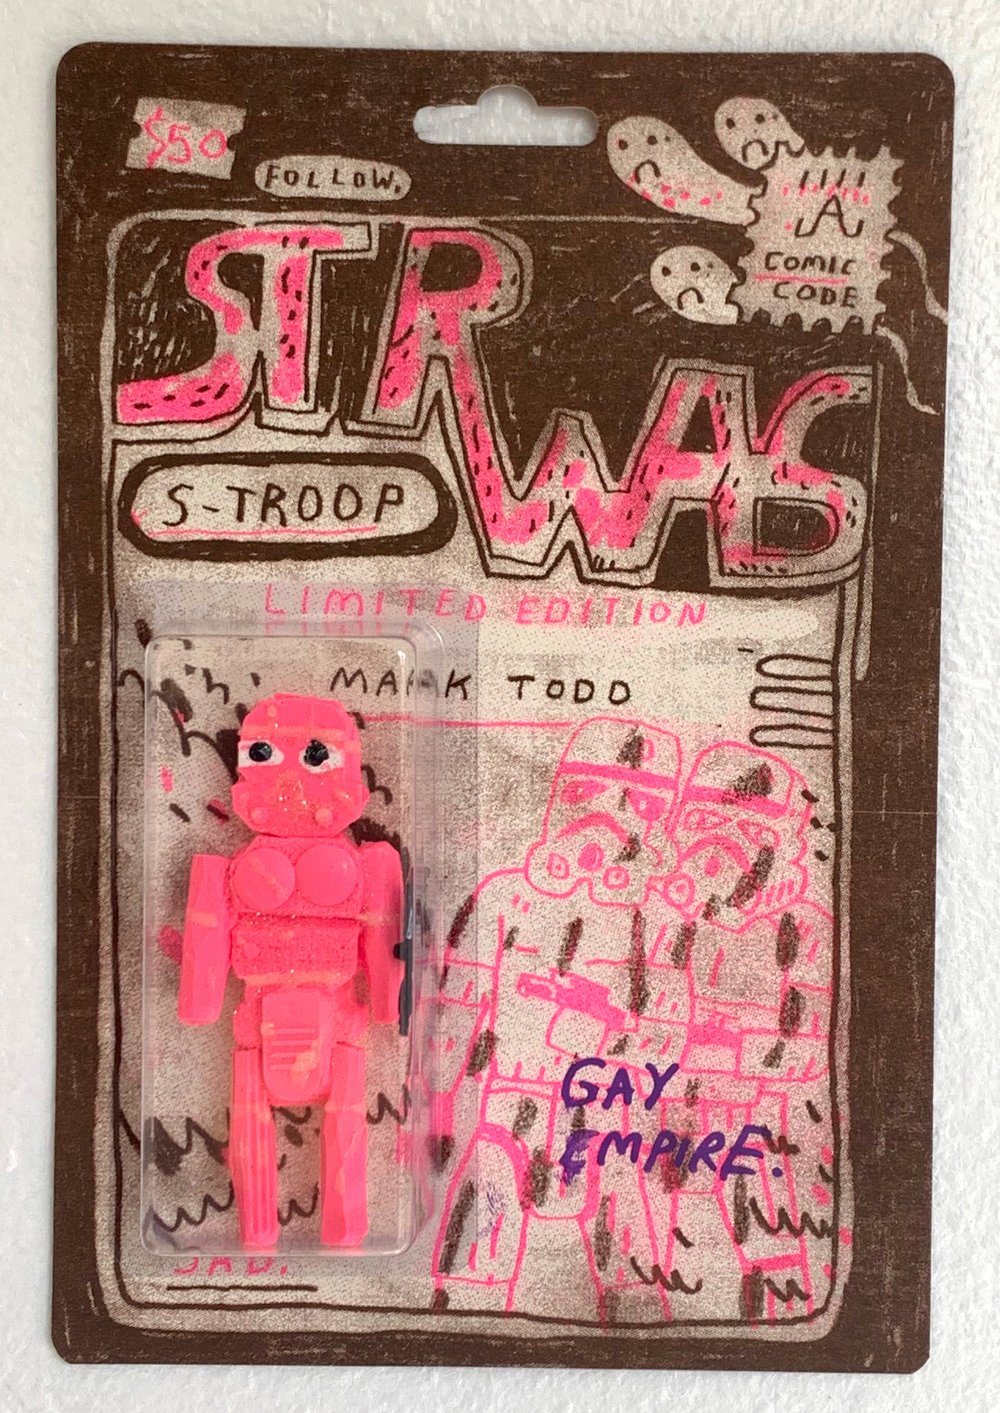 Image of (Mark Todd) S-TROOP pink sucklord